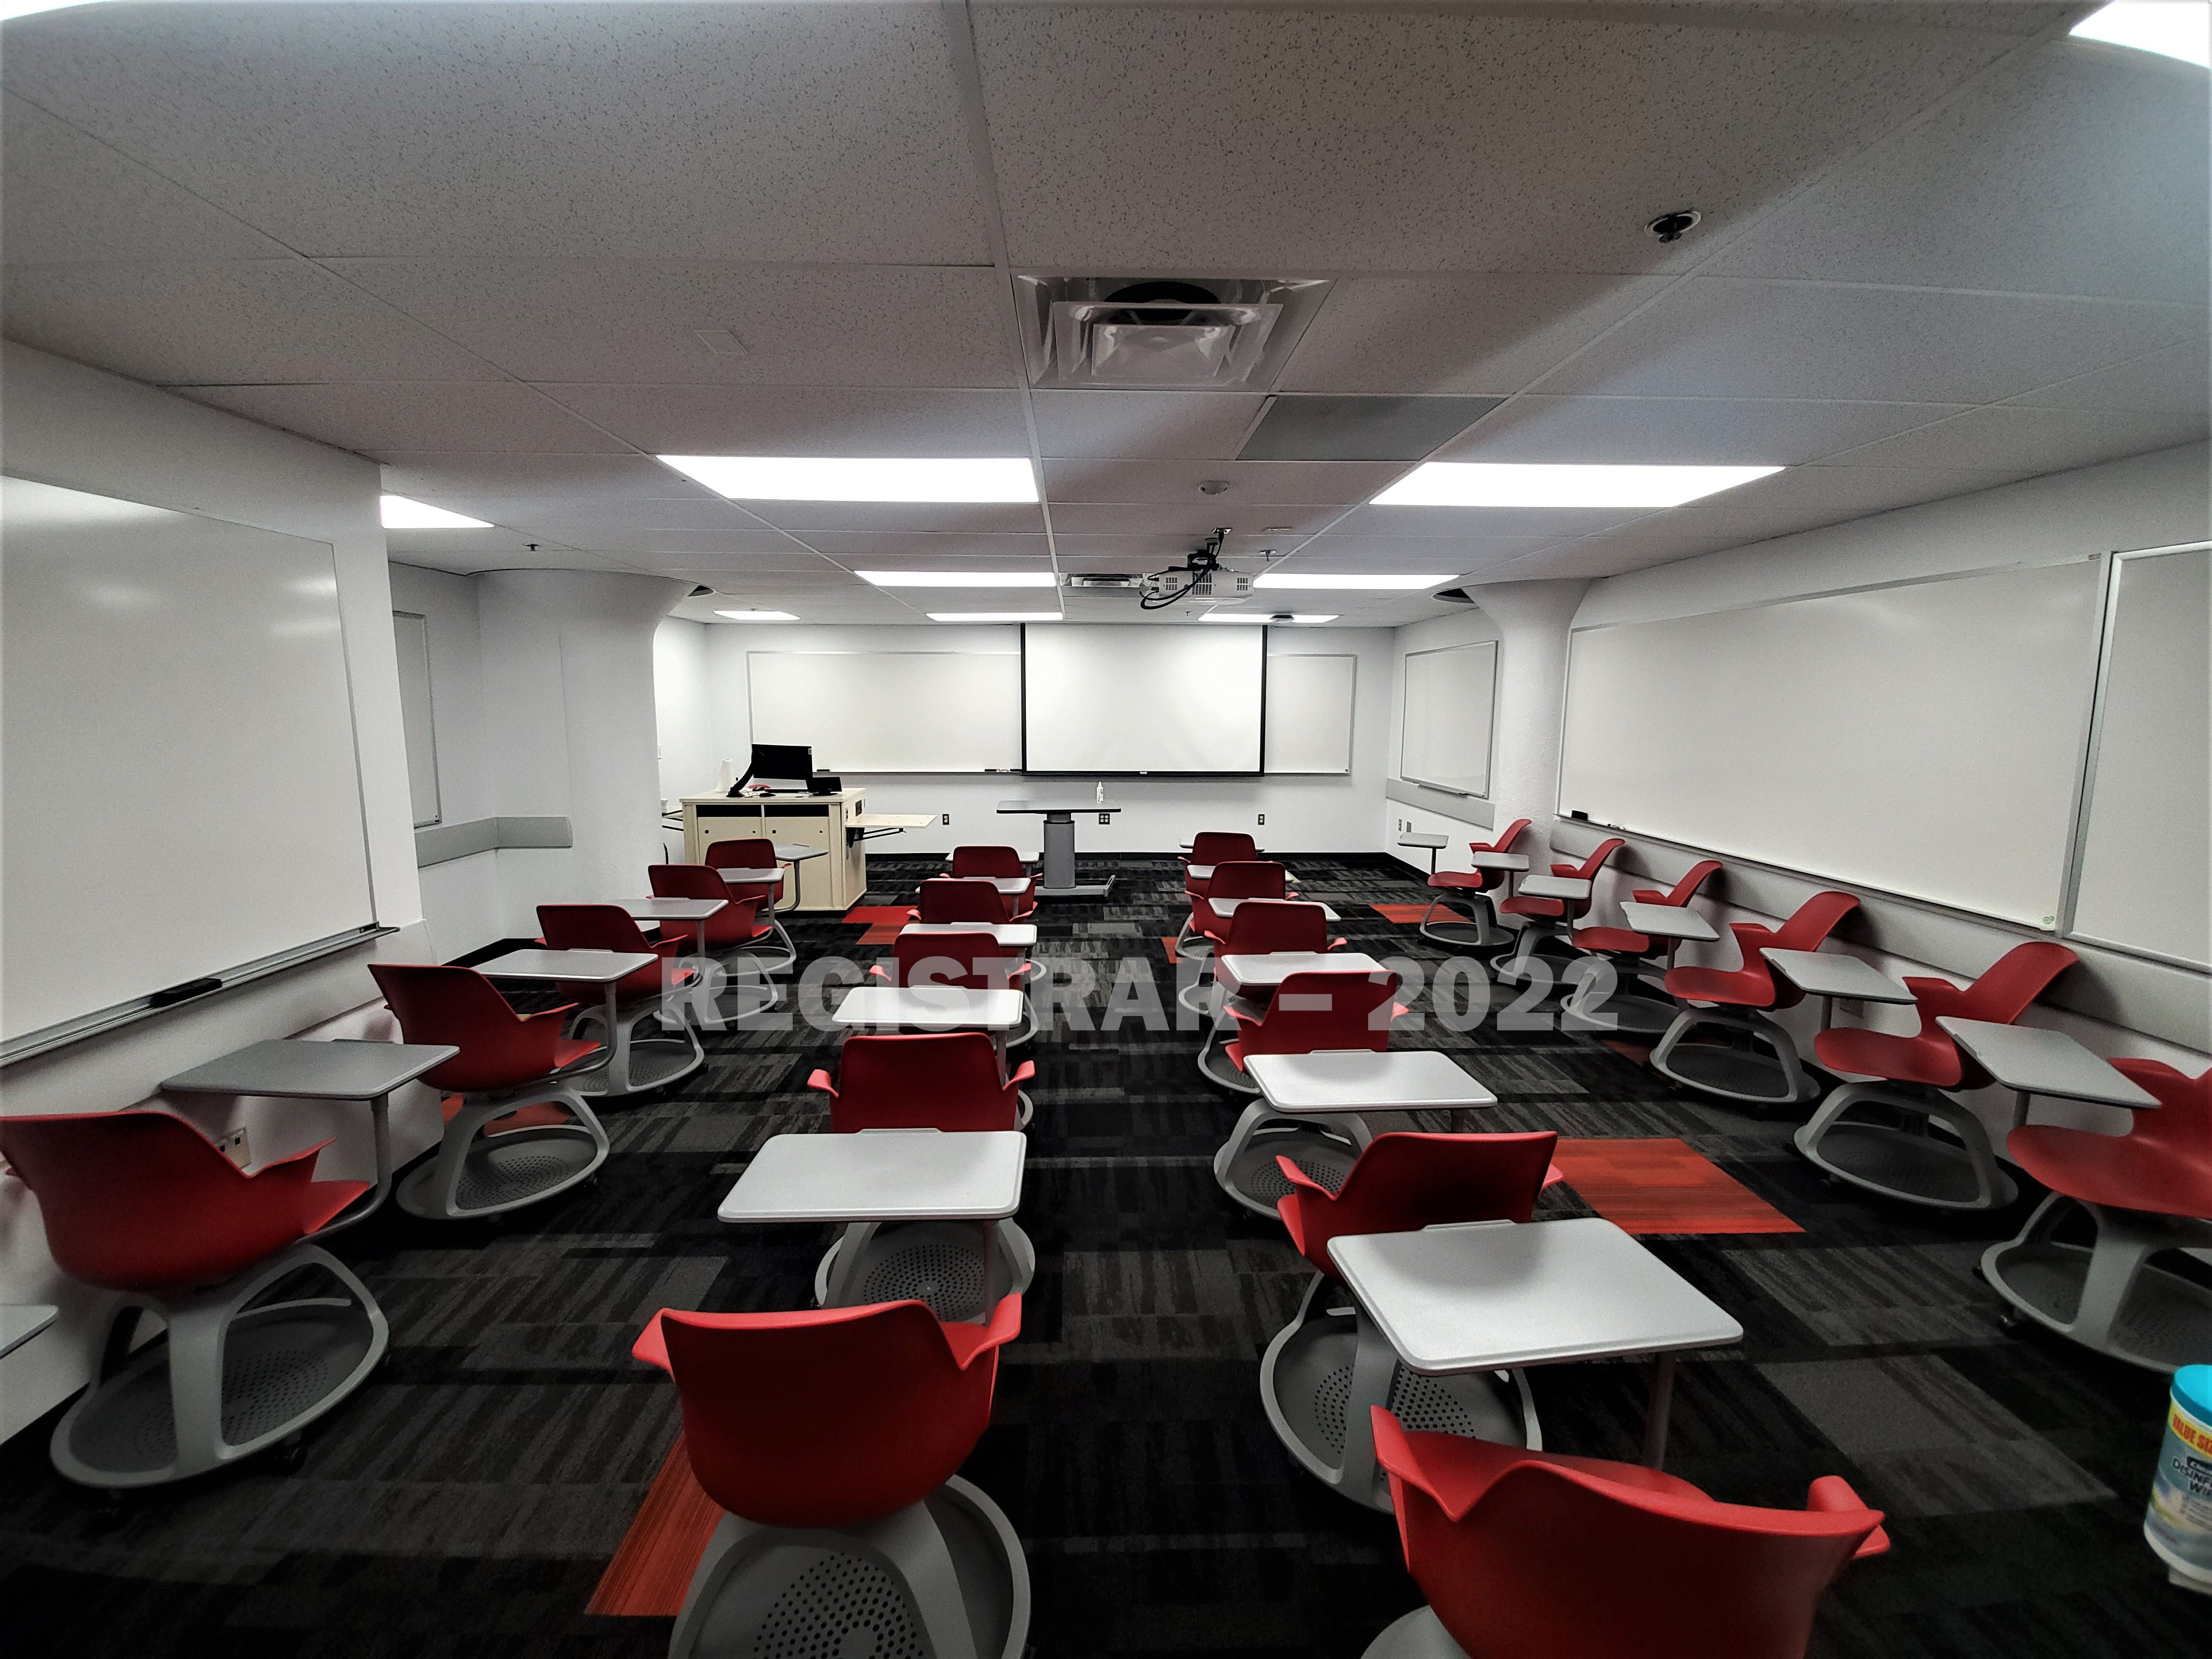 Enarson Classroom Building room 15 ultra wide angle view from the back of the room with projector screen down